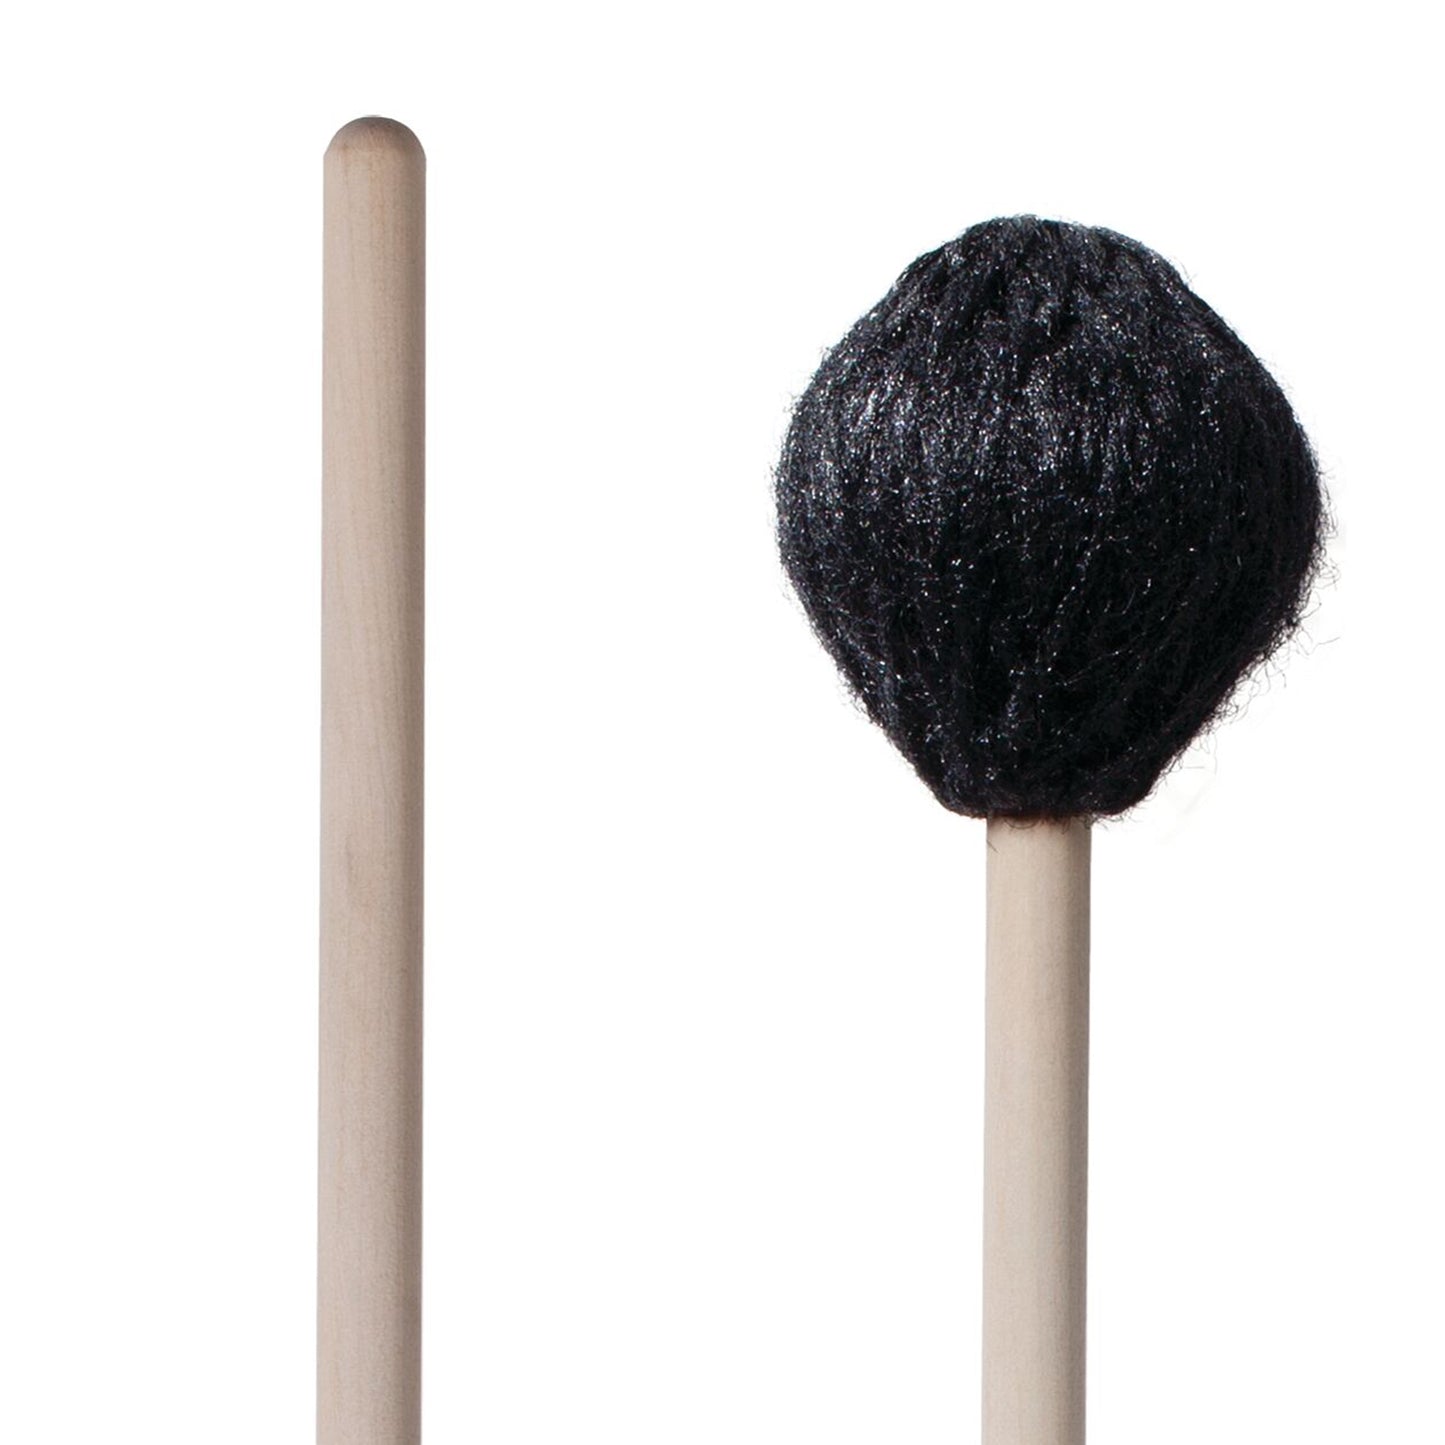 M182 - Corpsmaster Multi-Application Series - Medium, Synthetic Core Mallets